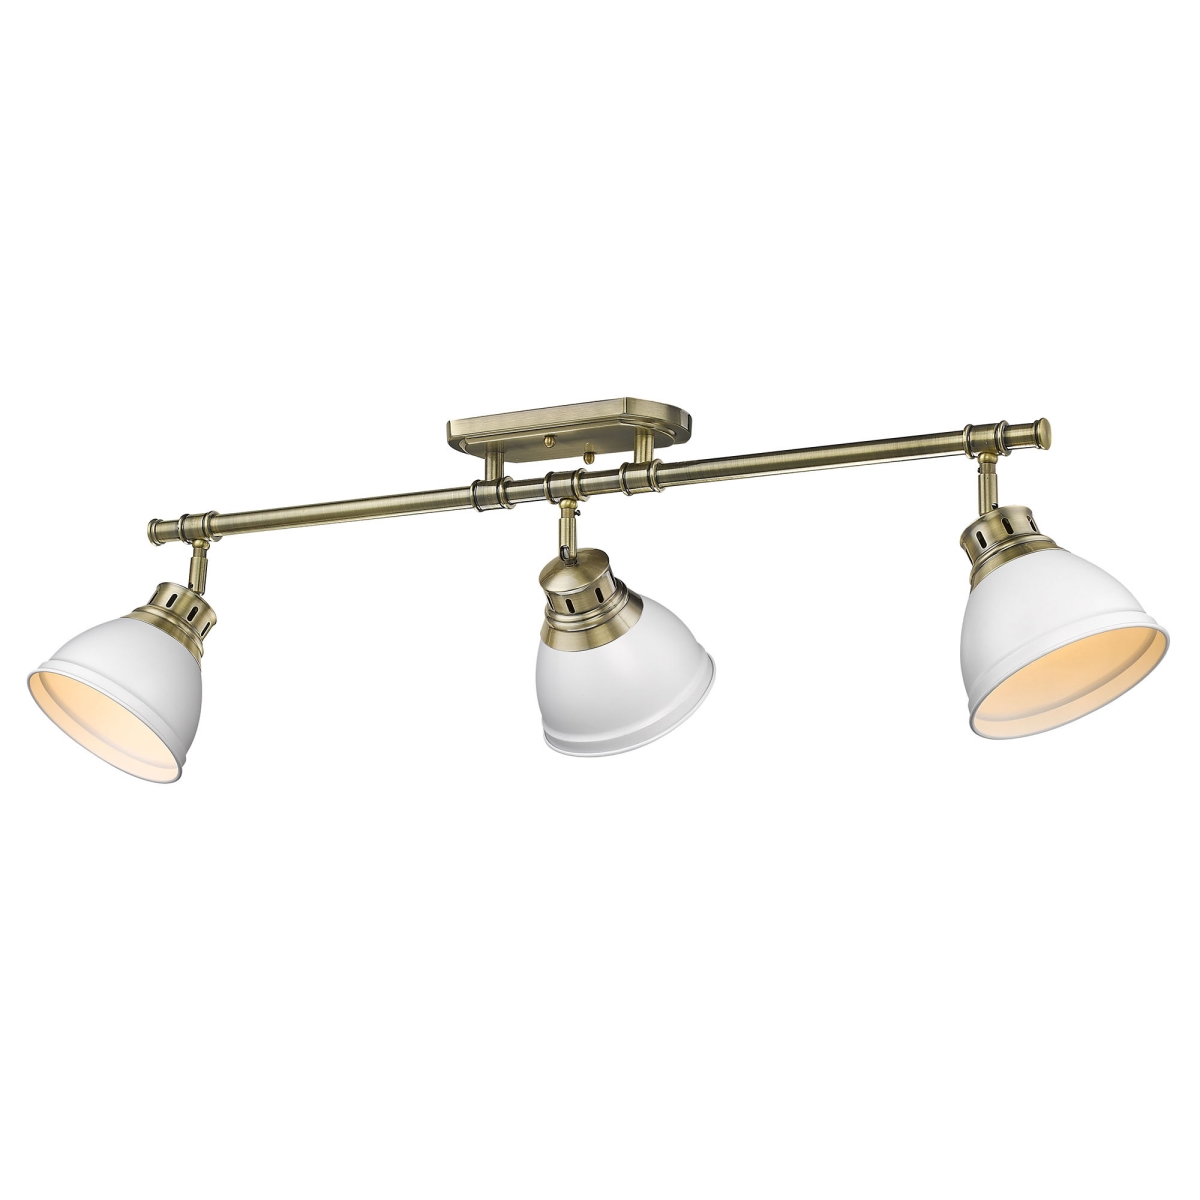 3602-3sf Ab-wht Duncan 3 Light Track Light In Aged Brass With Matte White Shade